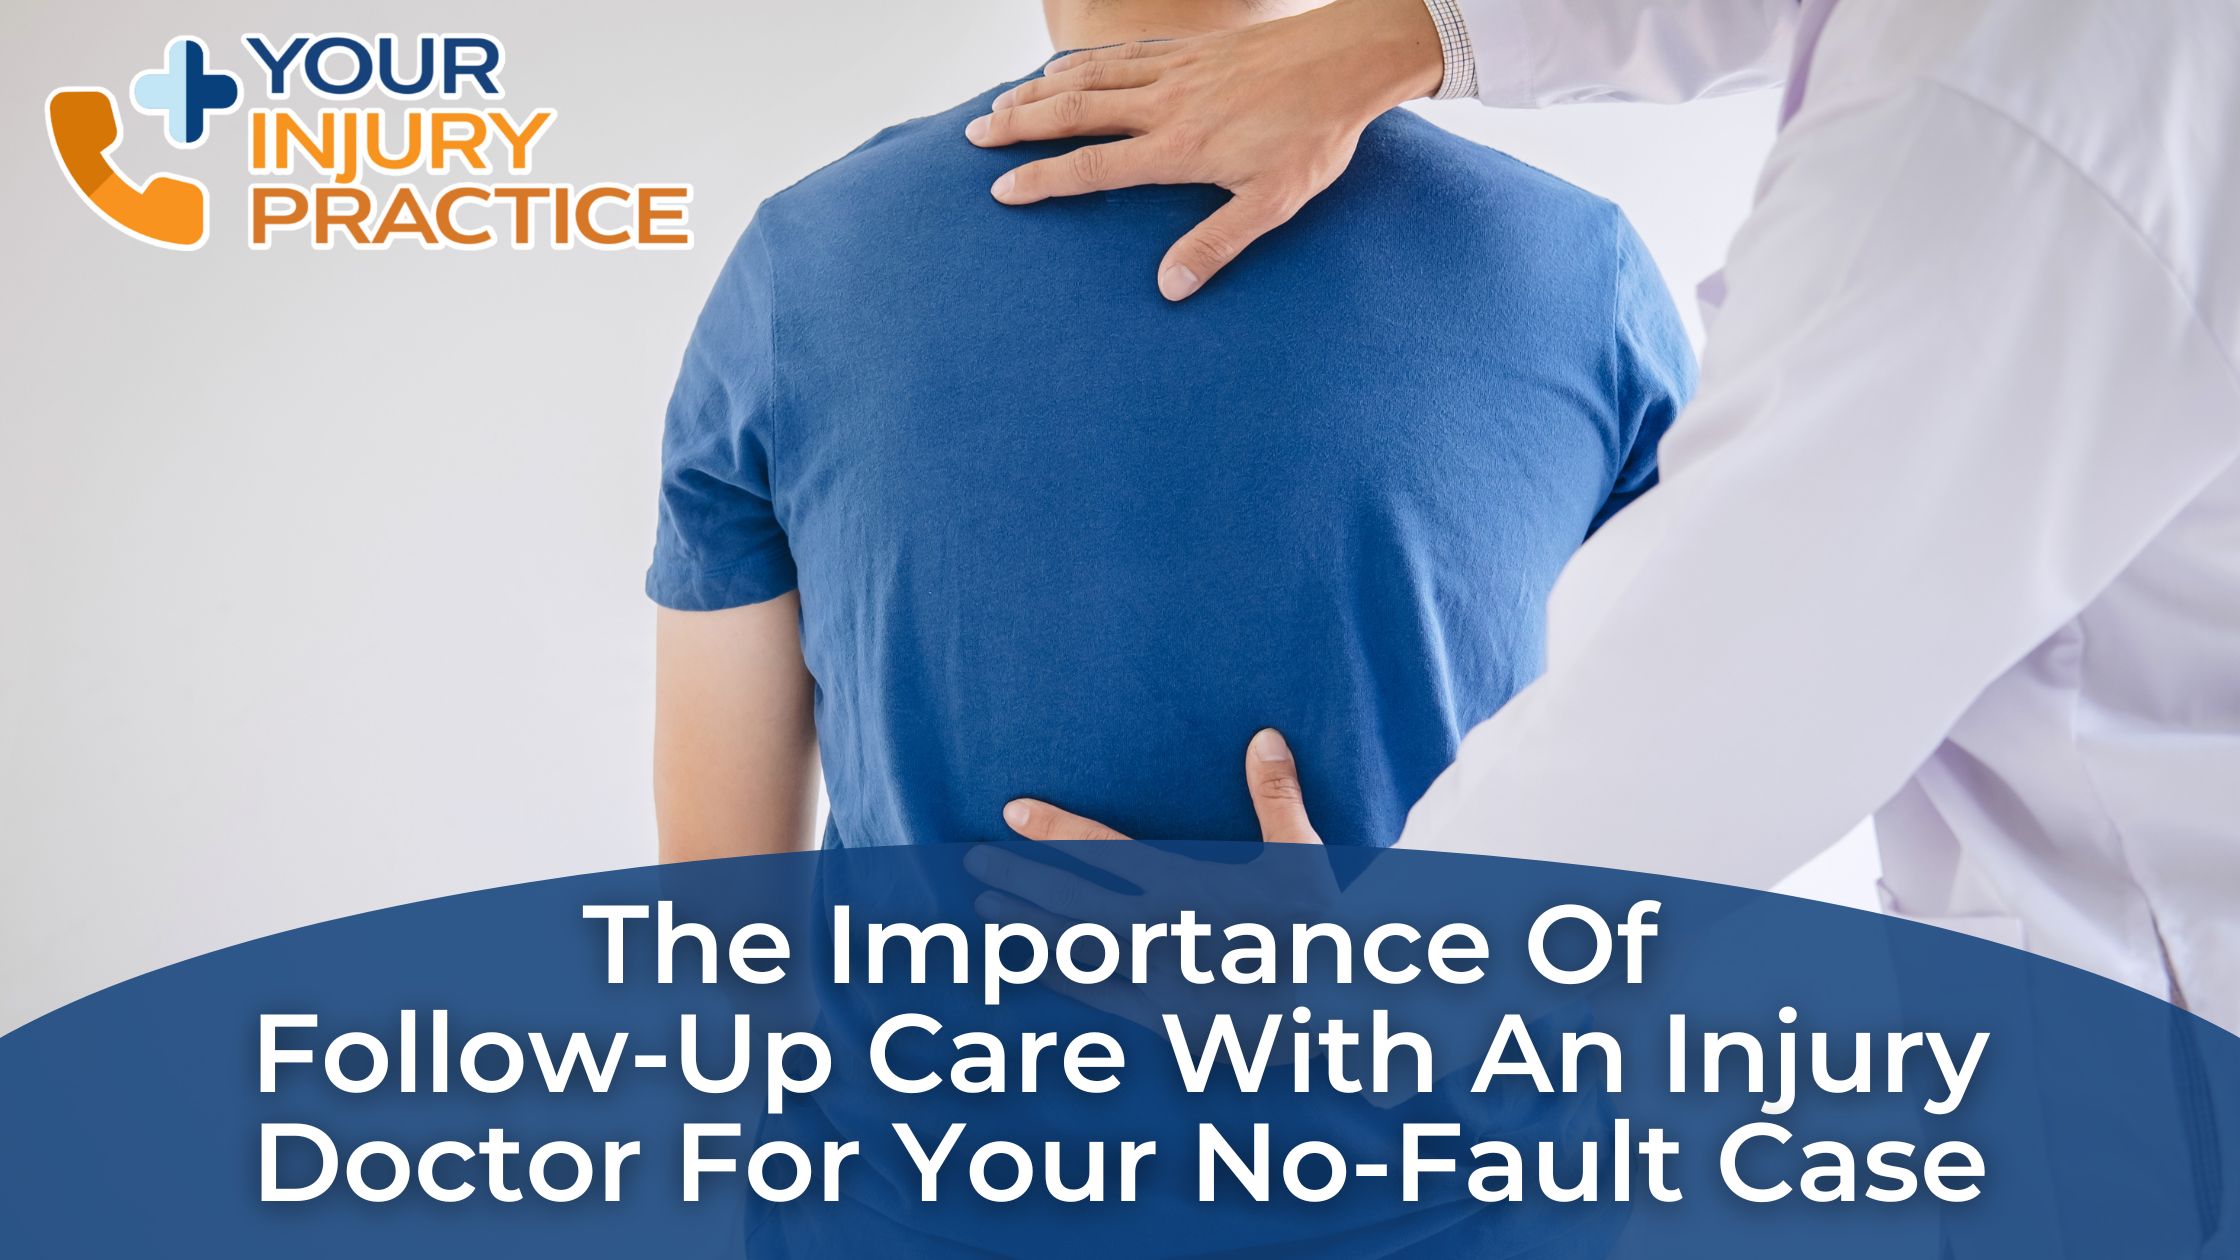 The Importance of Follow-Up Care with an Injury Doctor for Your No Fault Case